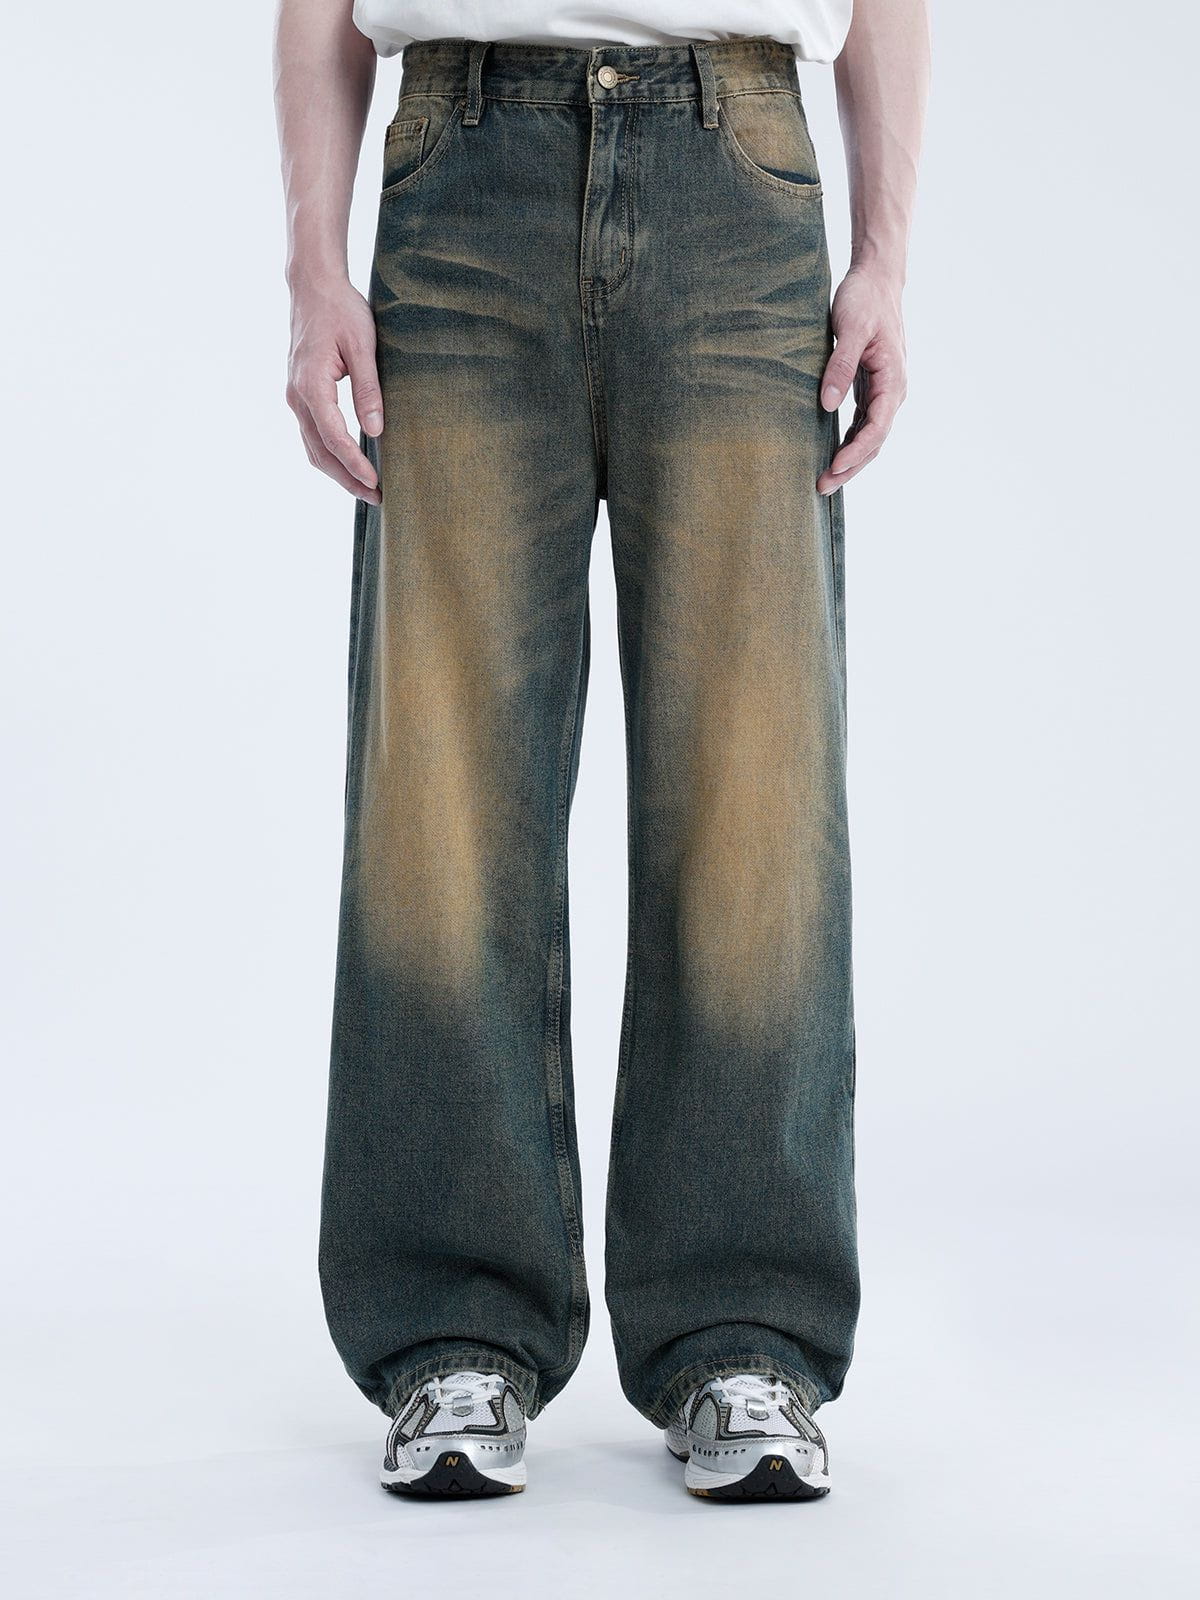 Aelfric Eden Mud Dyeing Washed Jeans